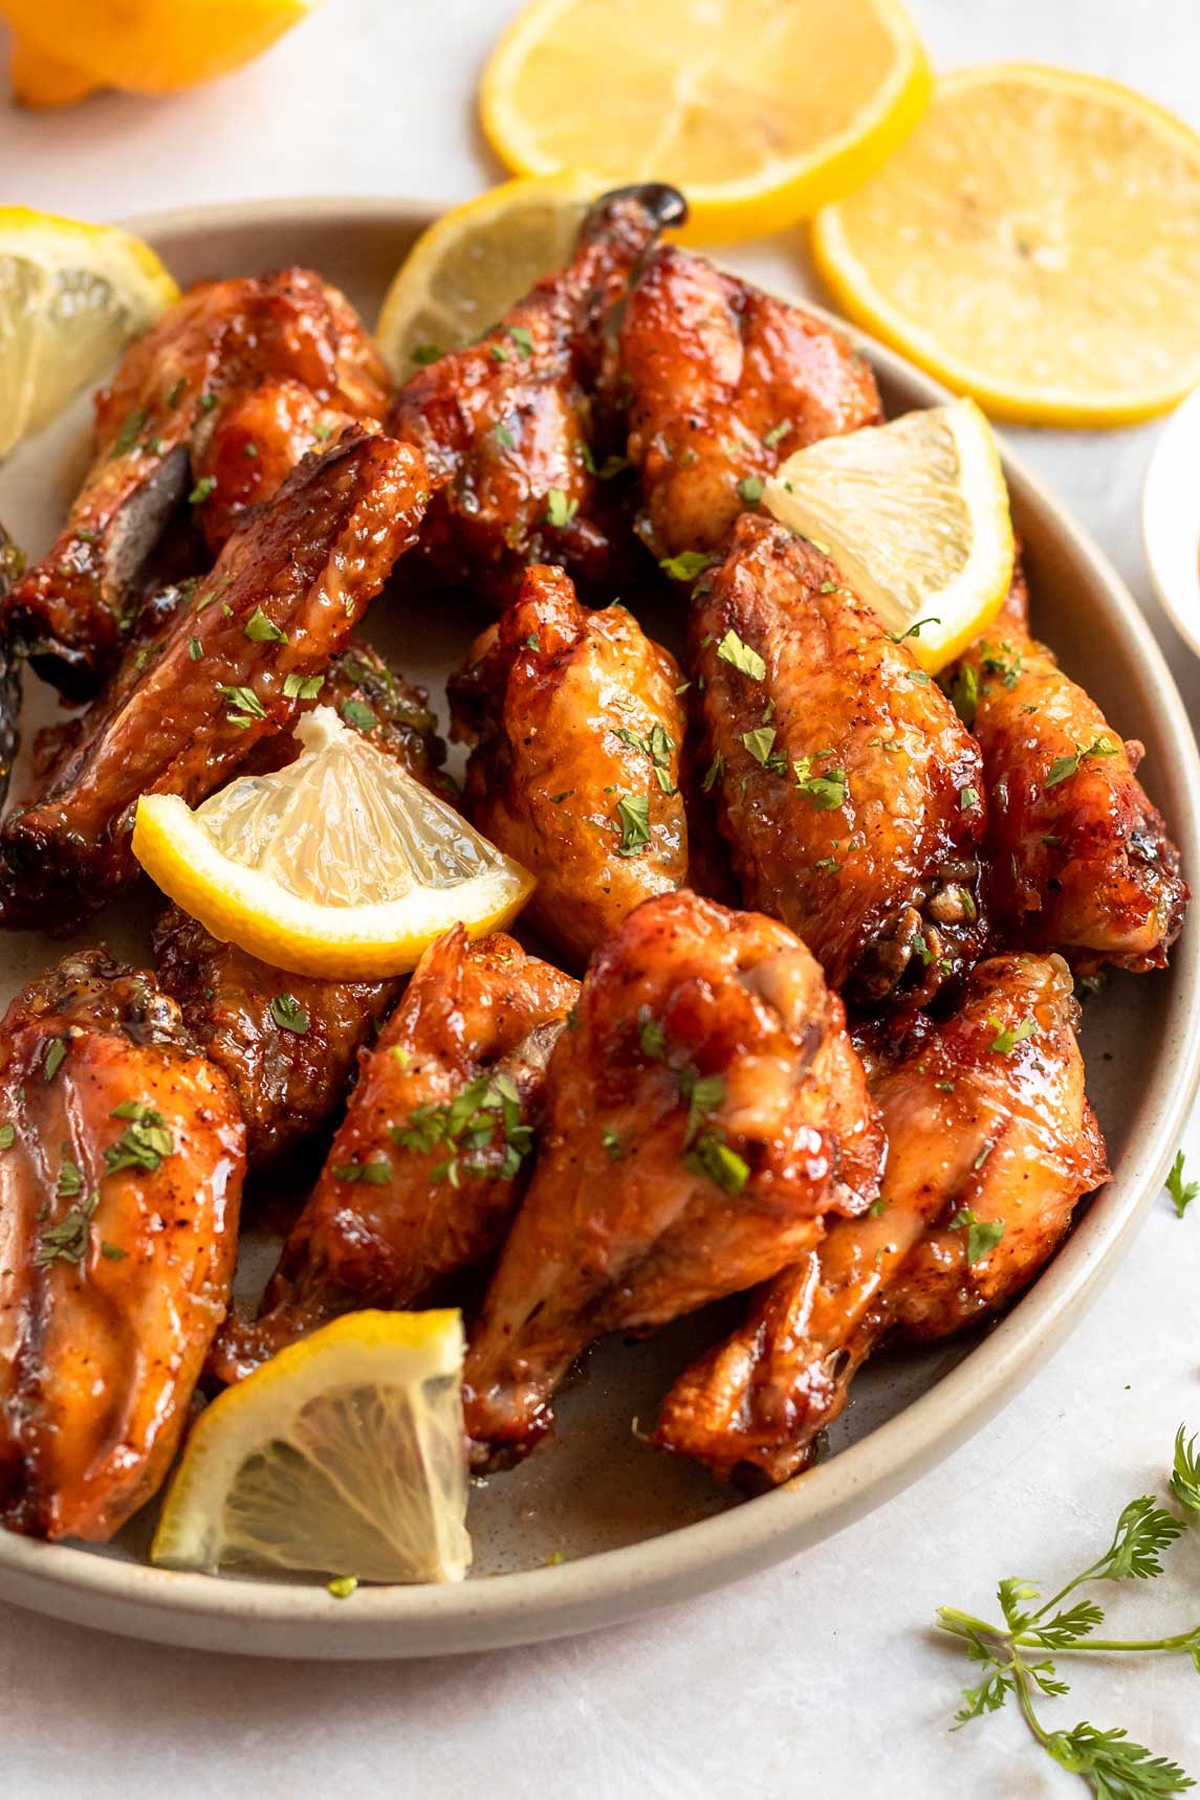 Golden chicken wings with a sauce of honey and lemon pepper.